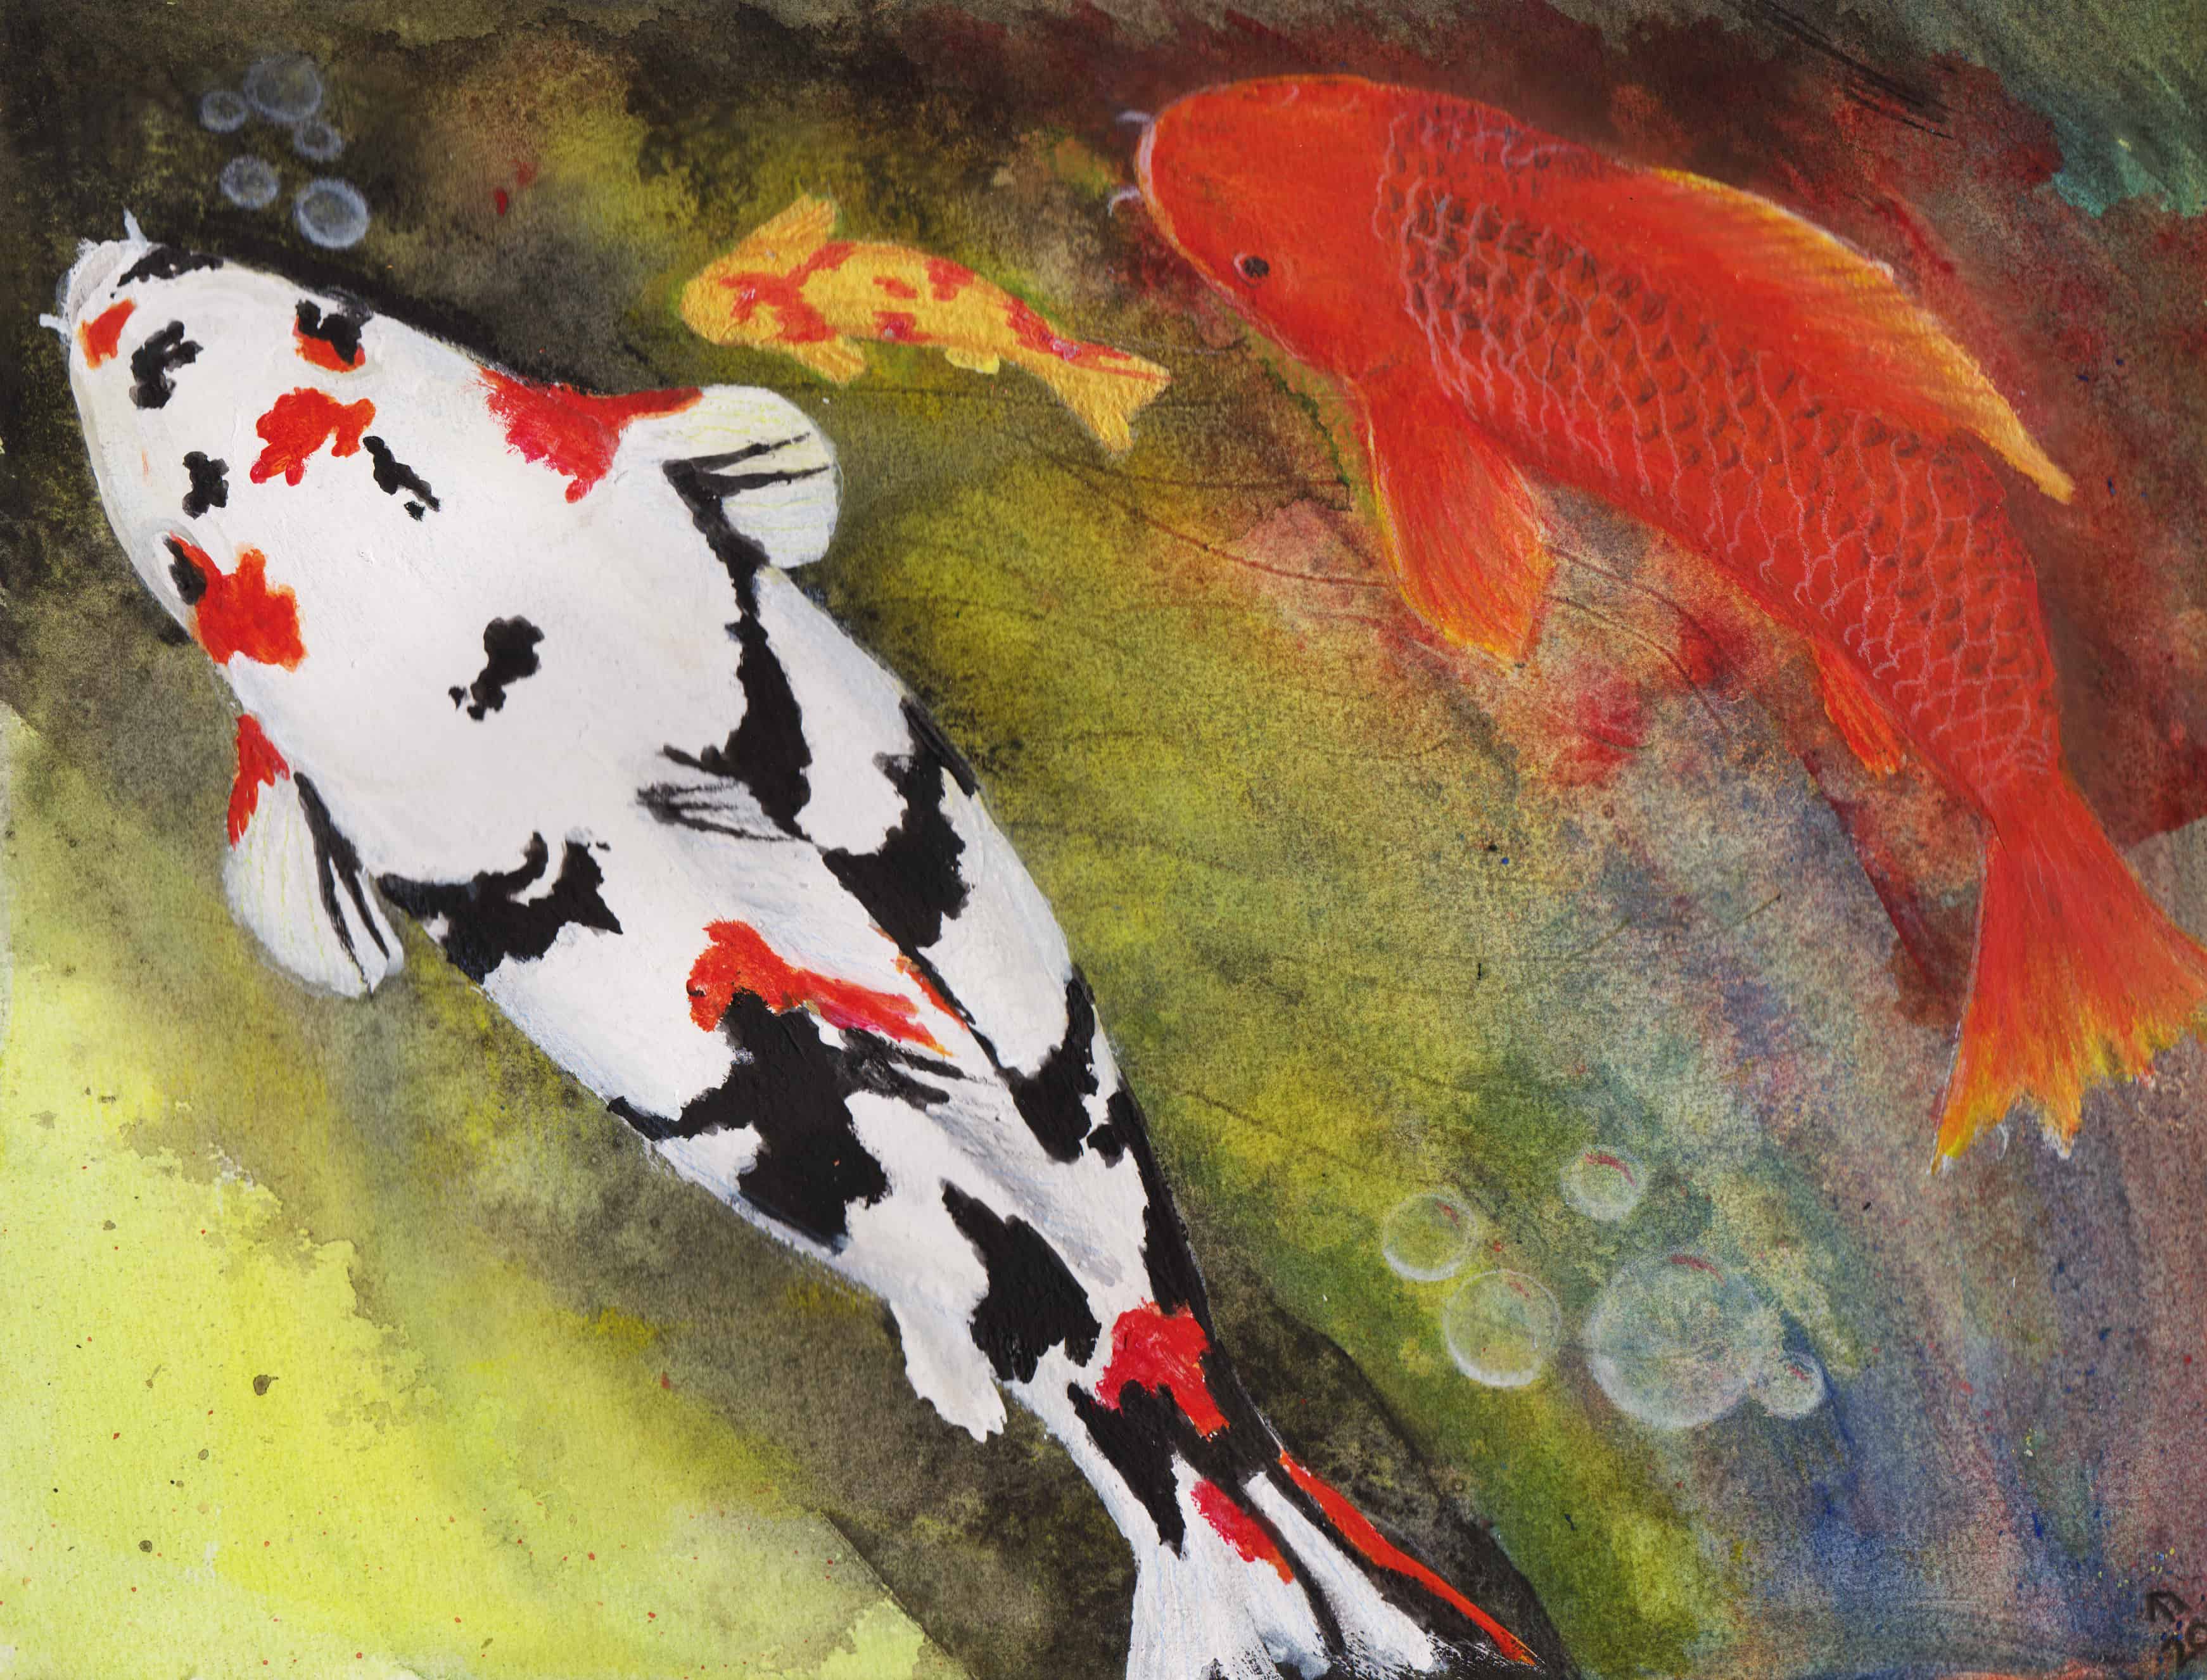 Playful painting of colorful koi fish swimming in a pond